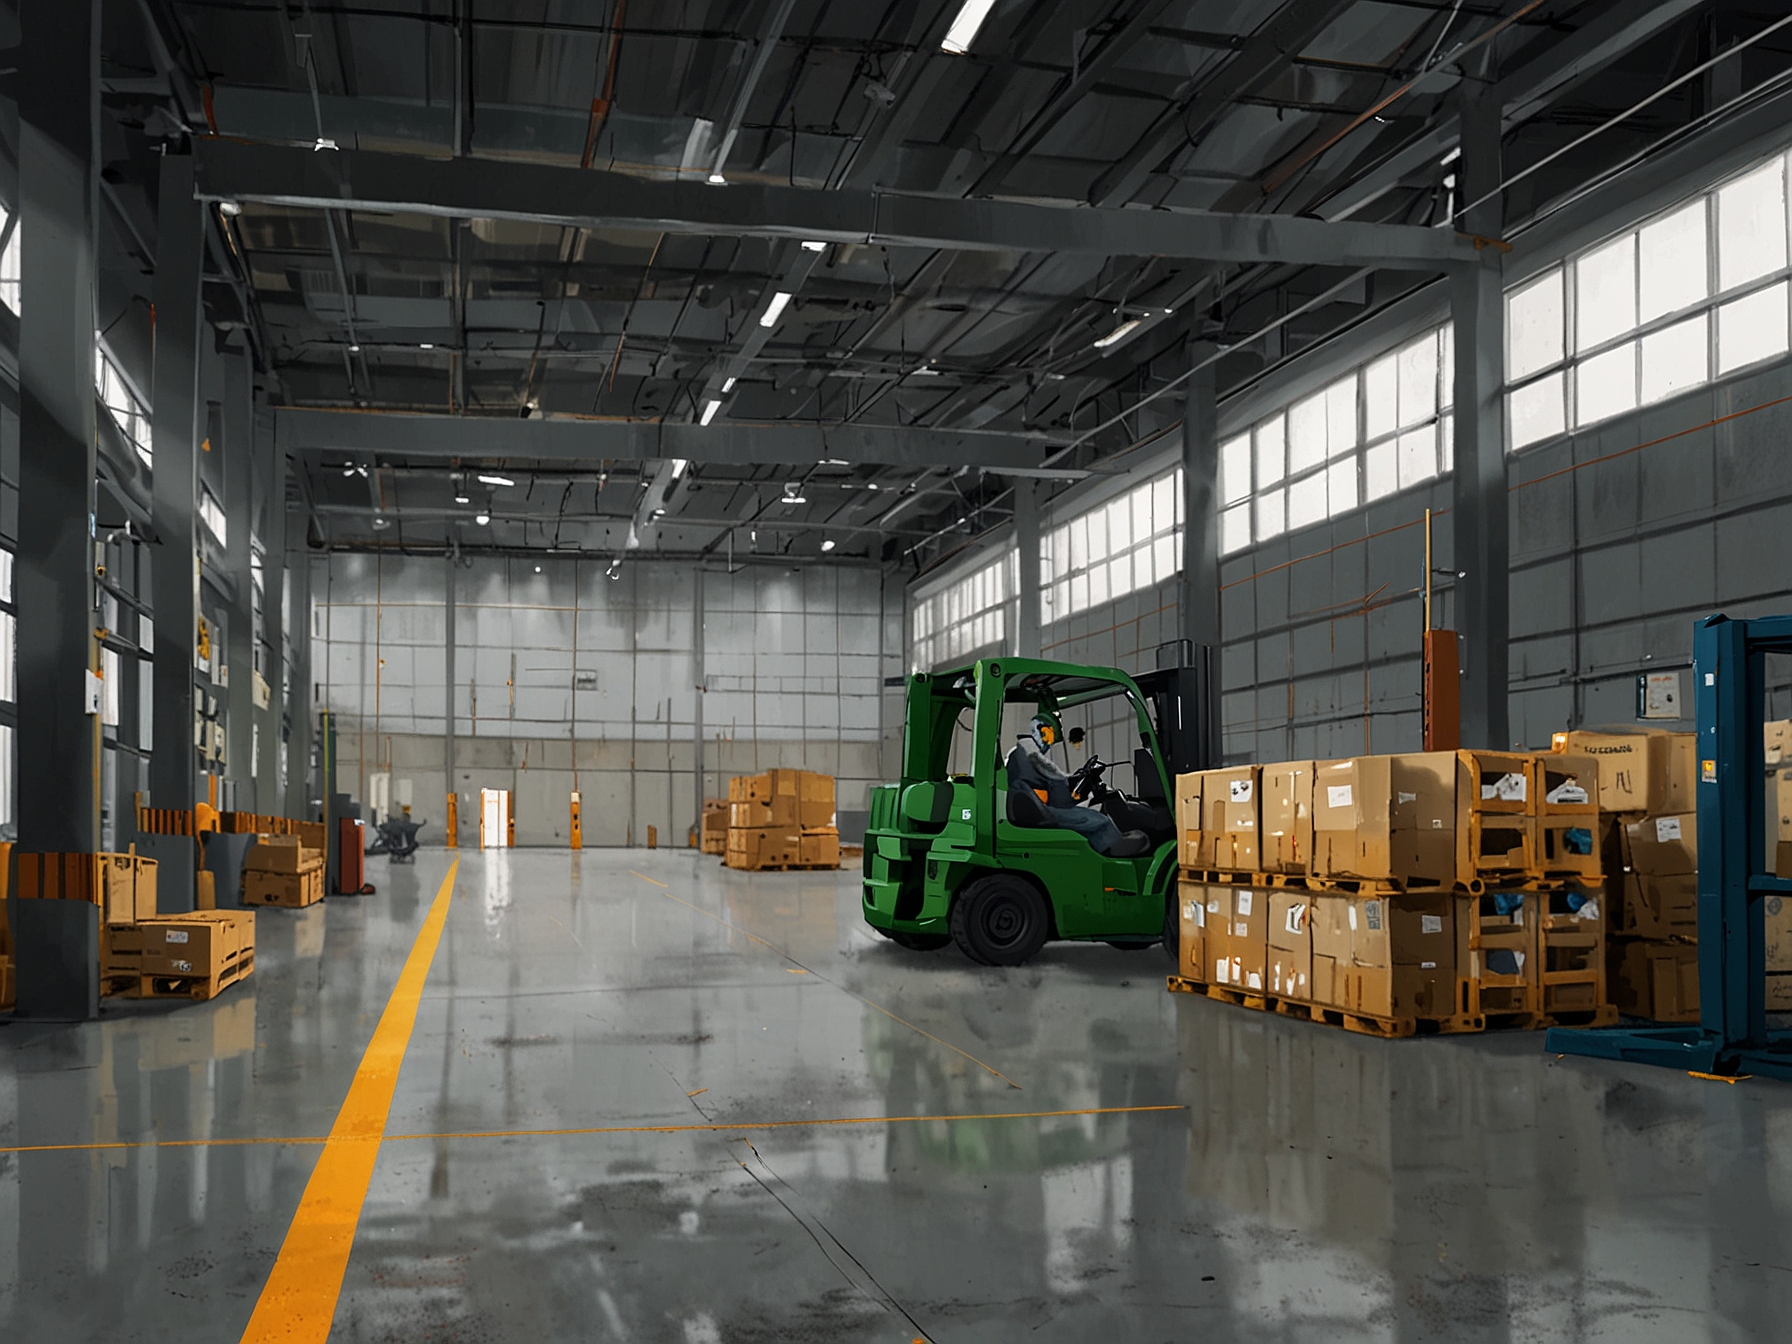 Modern warehouse facilities by Rexford Industrial, emphasizing their commitment to sustainability with green building practices and renewable energy integration.